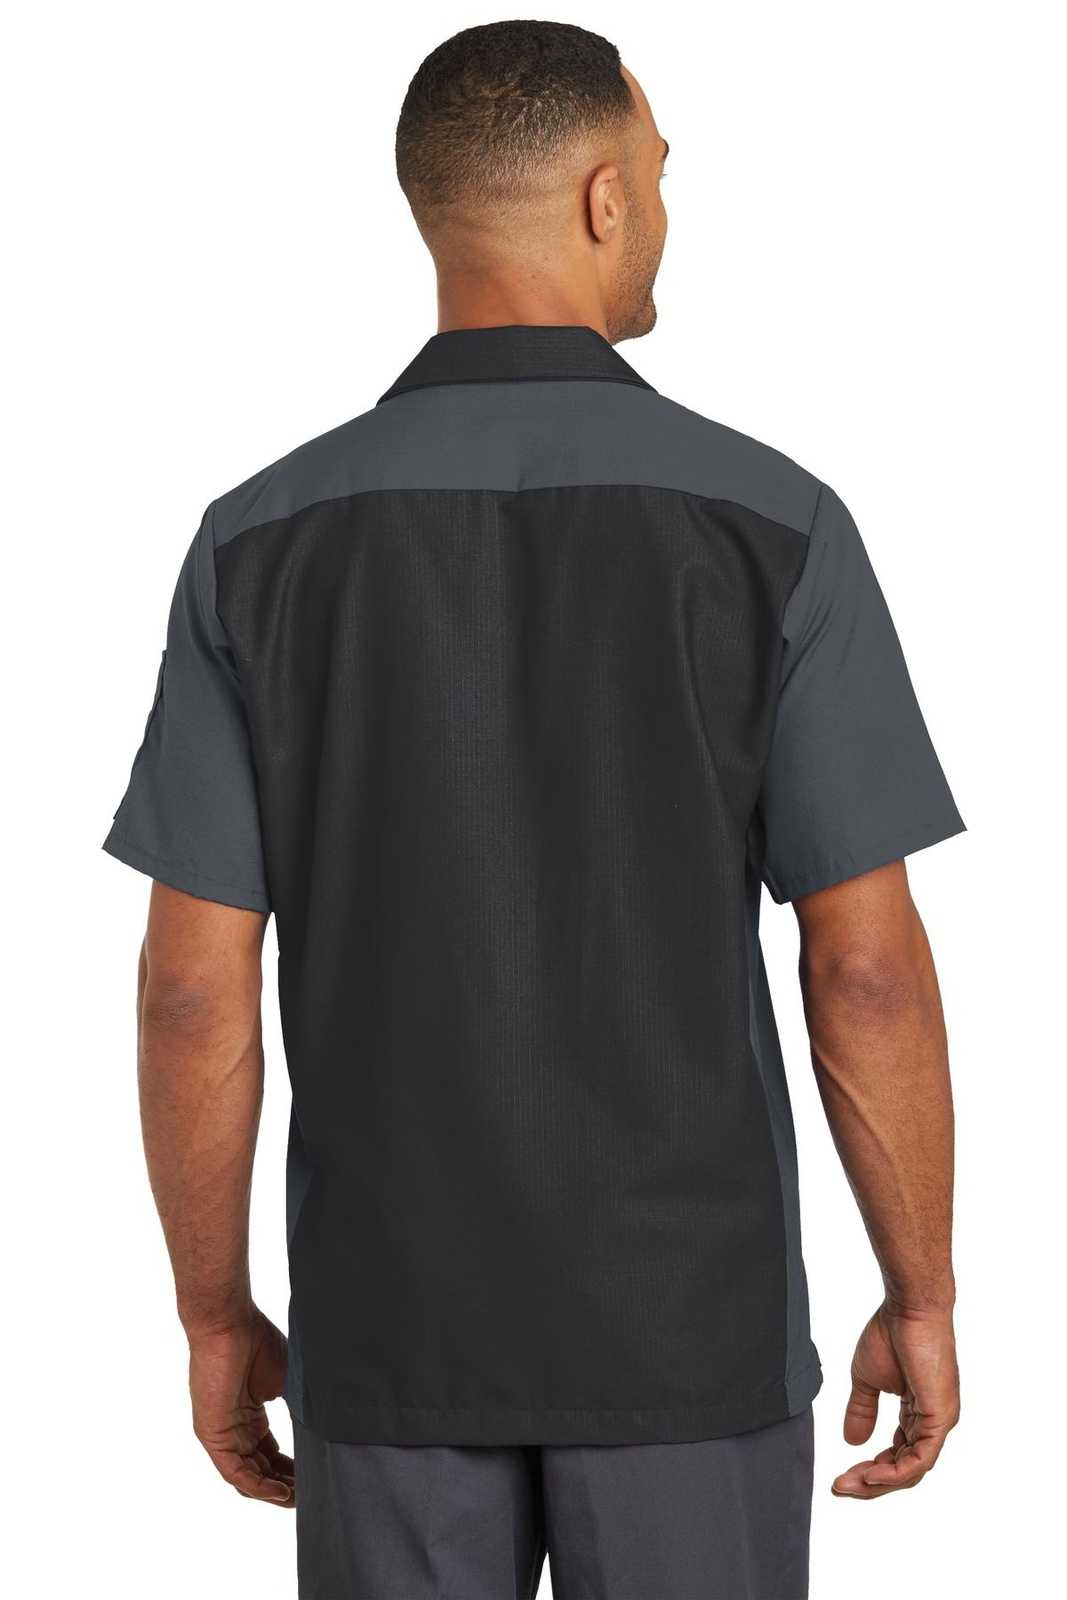 Red Kap SY20 Short Sleeve Ripstop Crew Shirt - Black/ Charcoal - HIT a Double - 2